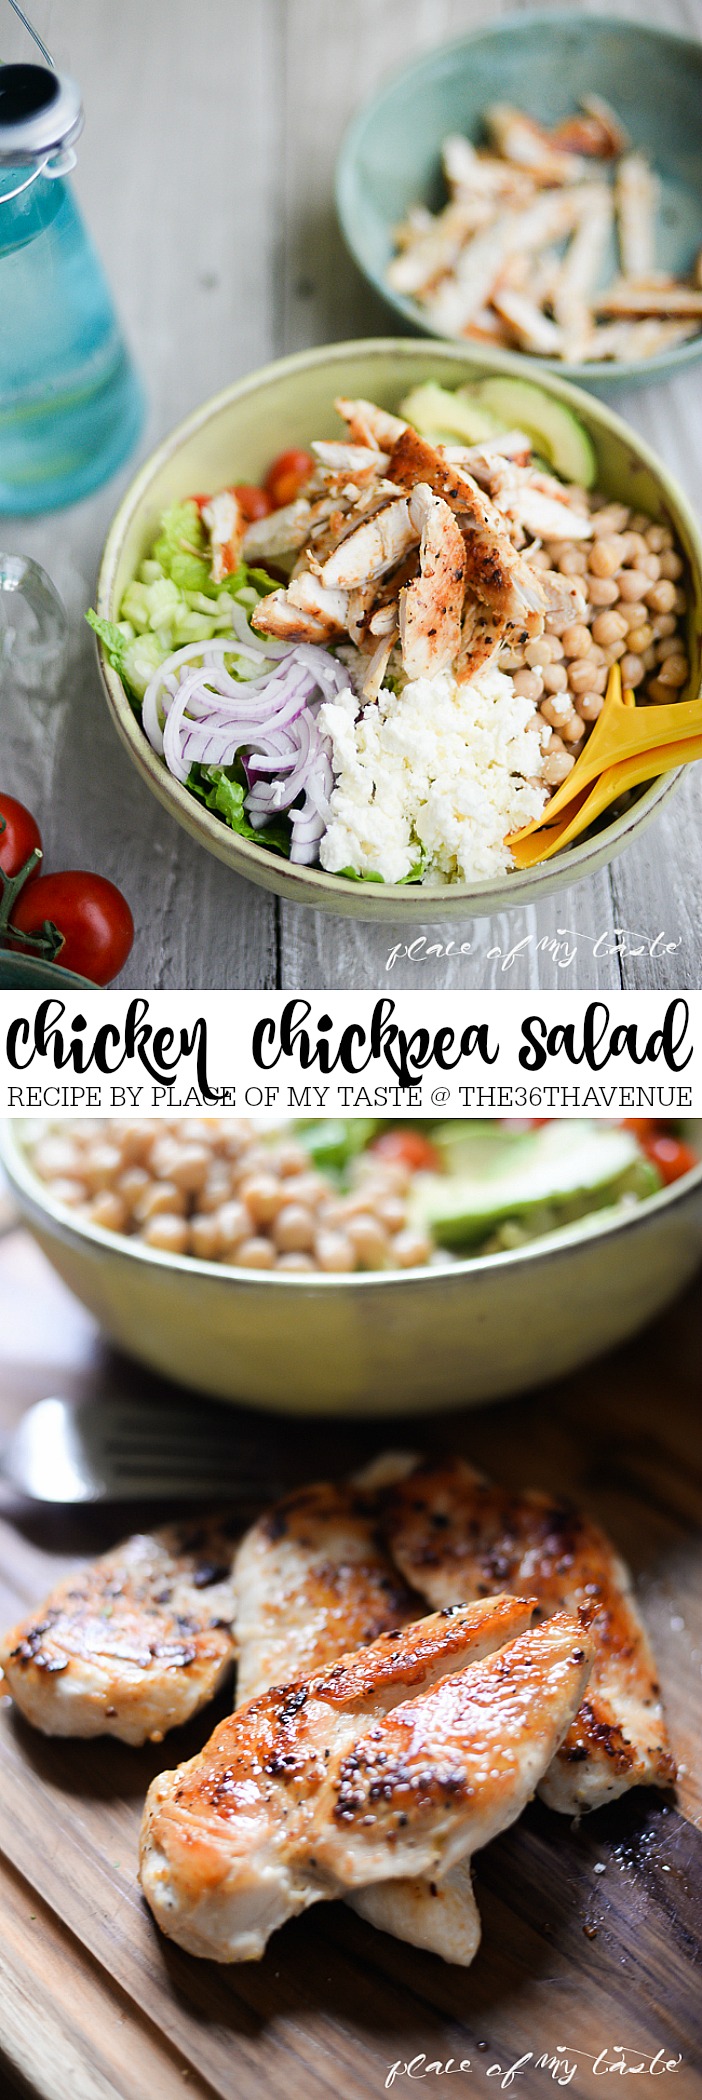 Healthy Recipes - This Chicken Chickpea Salad is delicious and a great source of protein. If you are looking for chicken recipes that are also healthy and good for you, try this salad! PIN IT NOW and make it later!